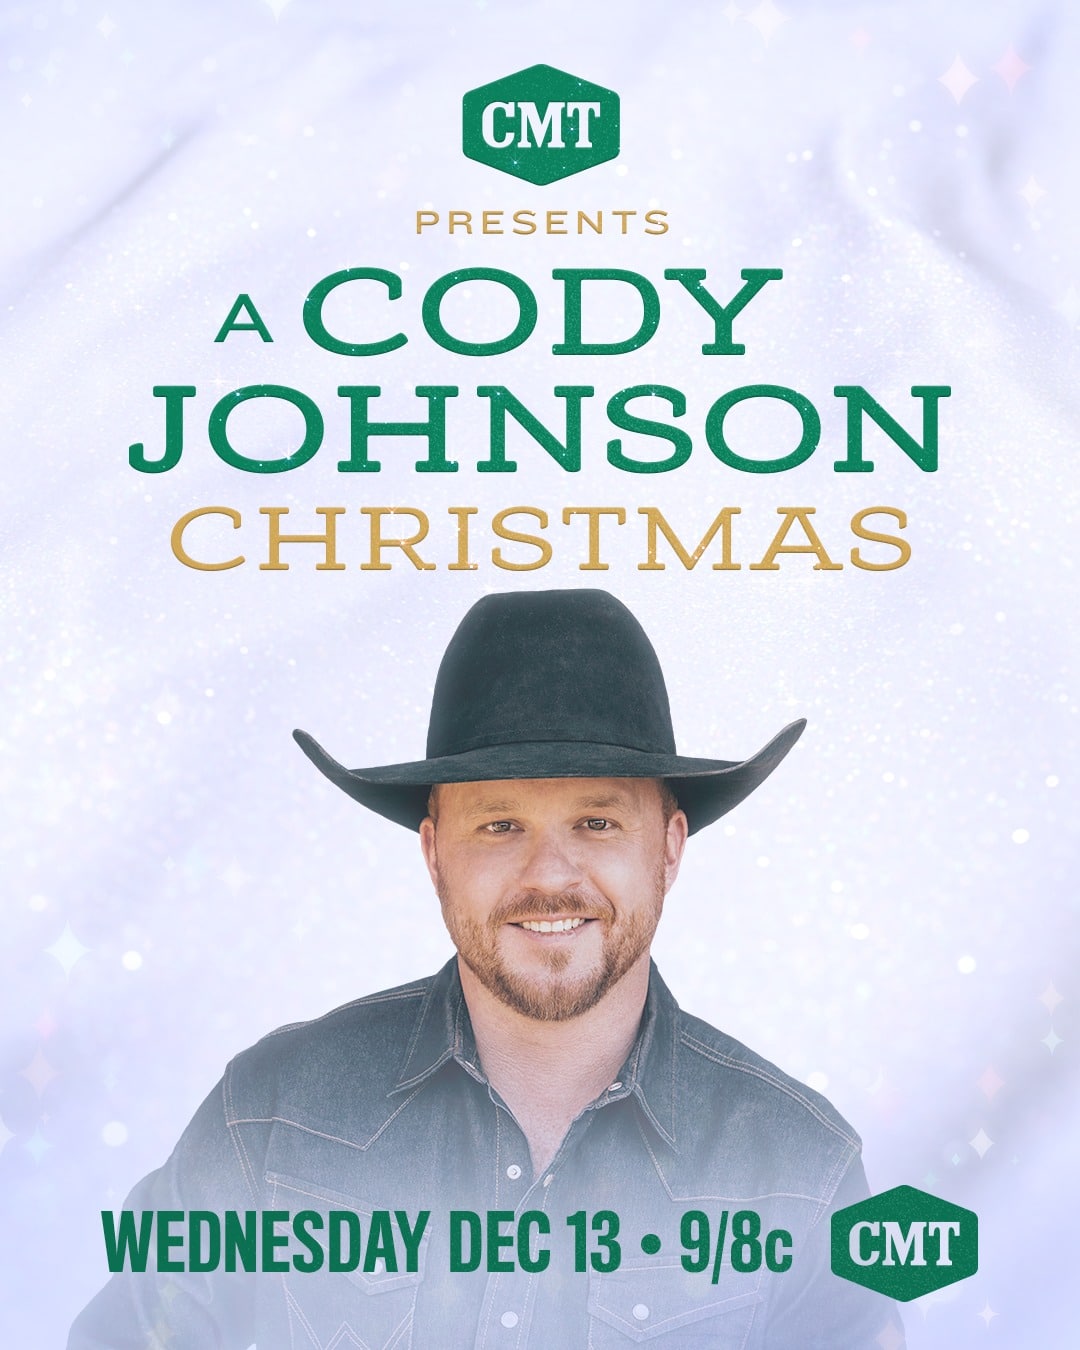 The promotional poster for the Cody Johnson Christmas special